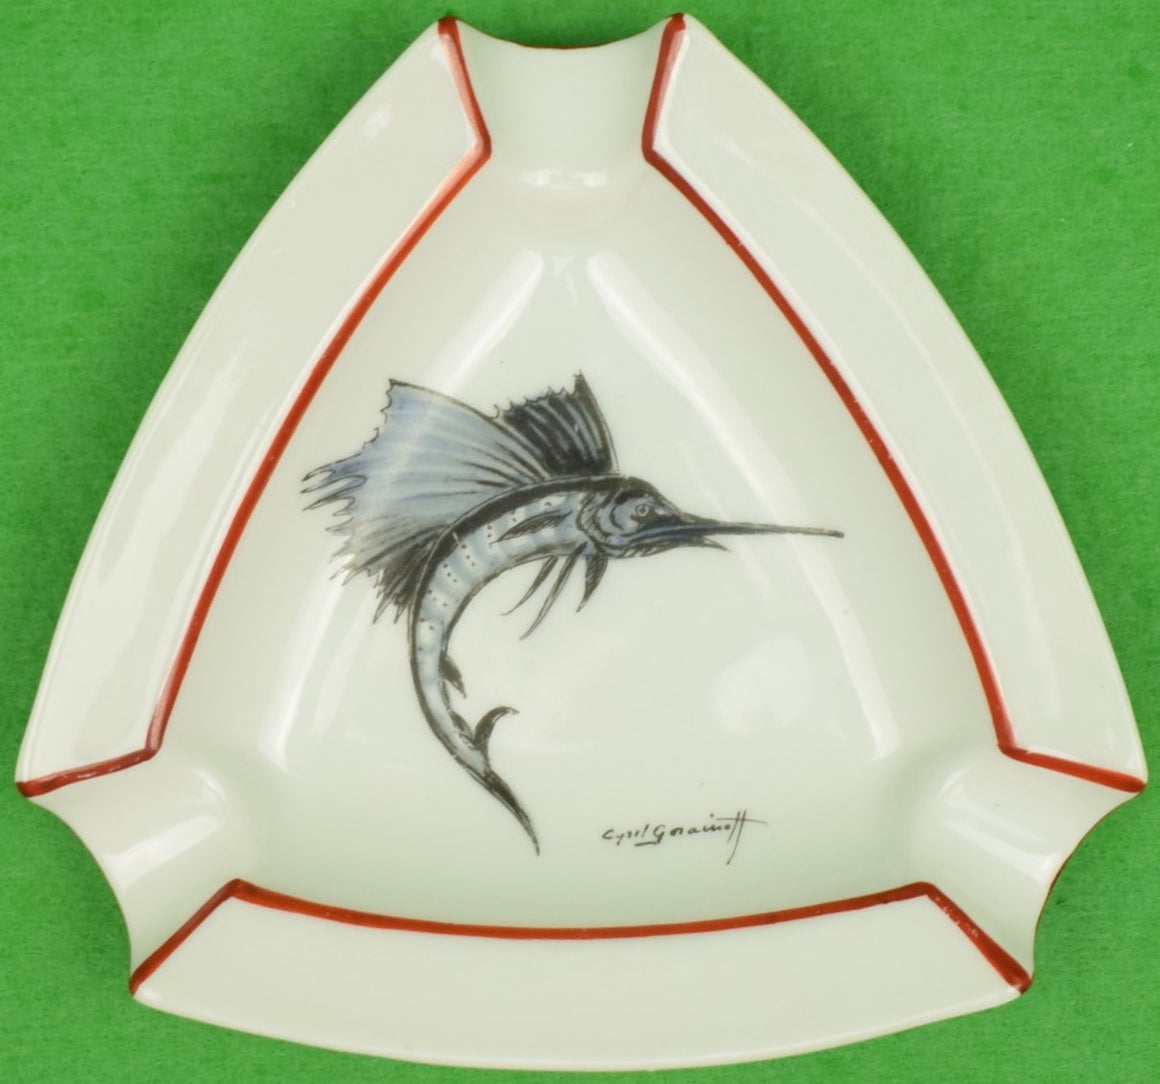 "Cyril Gorainoff x Abercrombie & Fitch c1940s Leaping Sailfish Ashtray" (SOLD)